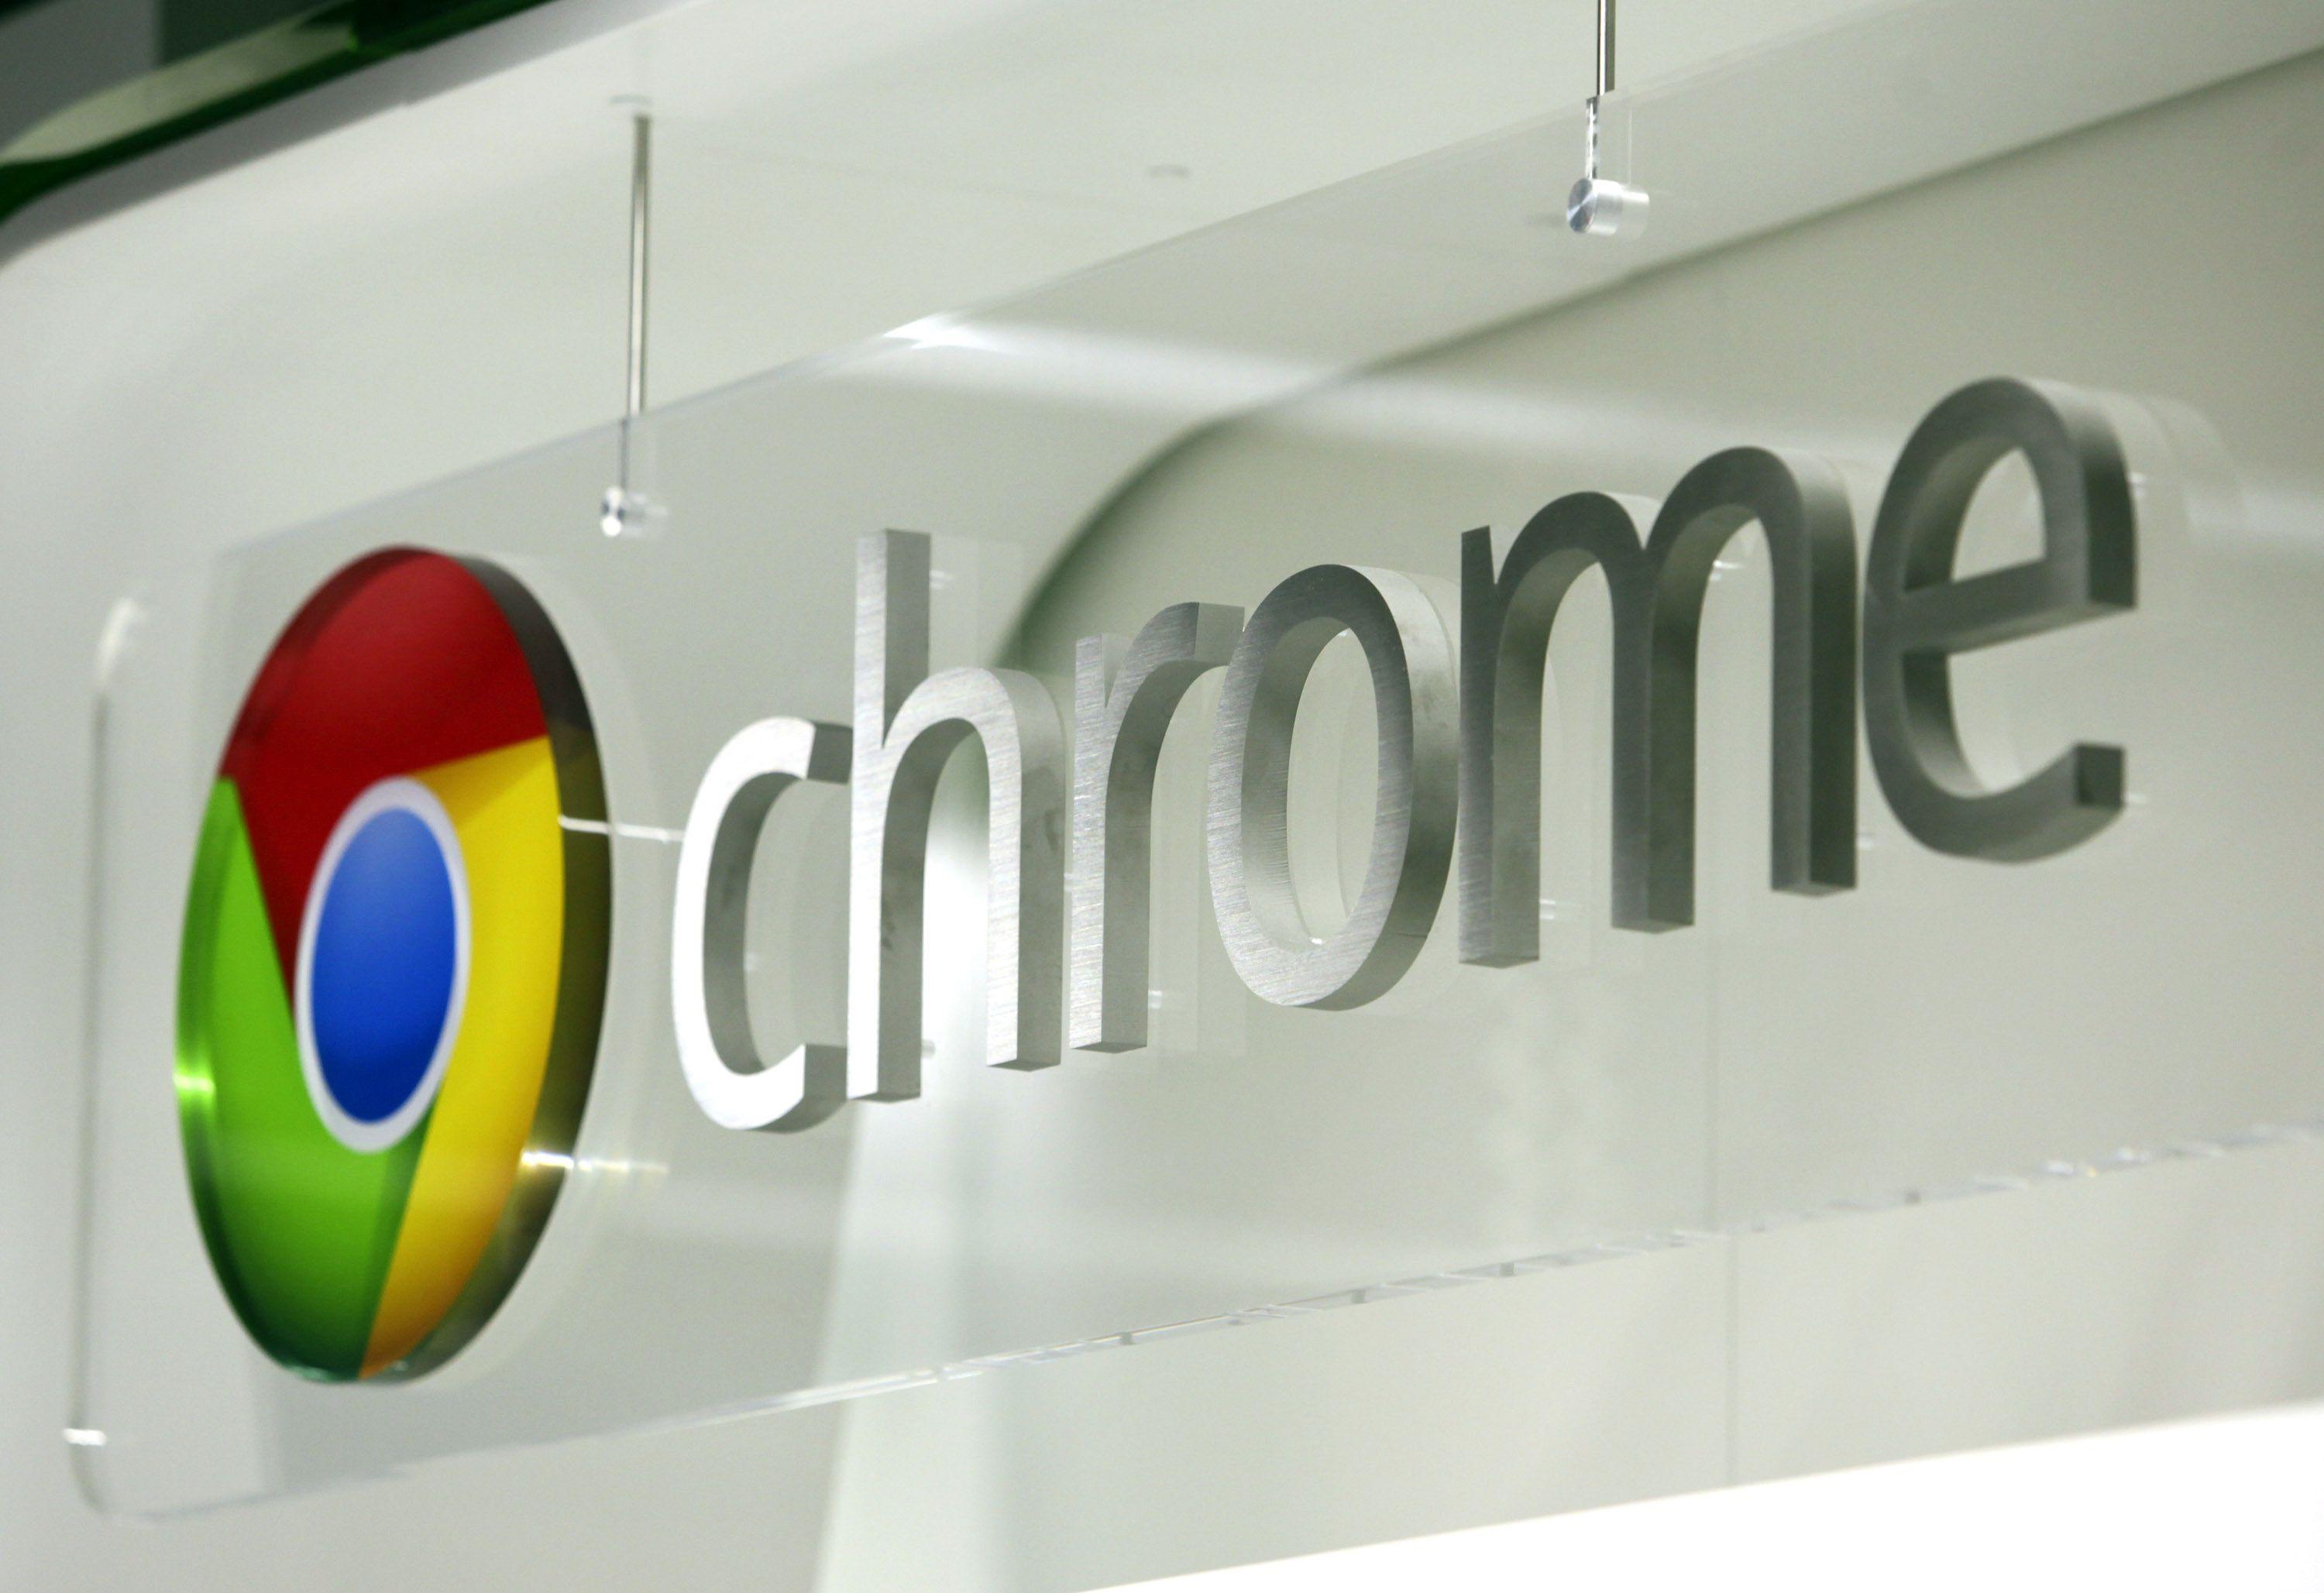 Chrome World Logo - Google Maps' Chrome Extension Is Too Hypnotic for Work | Time